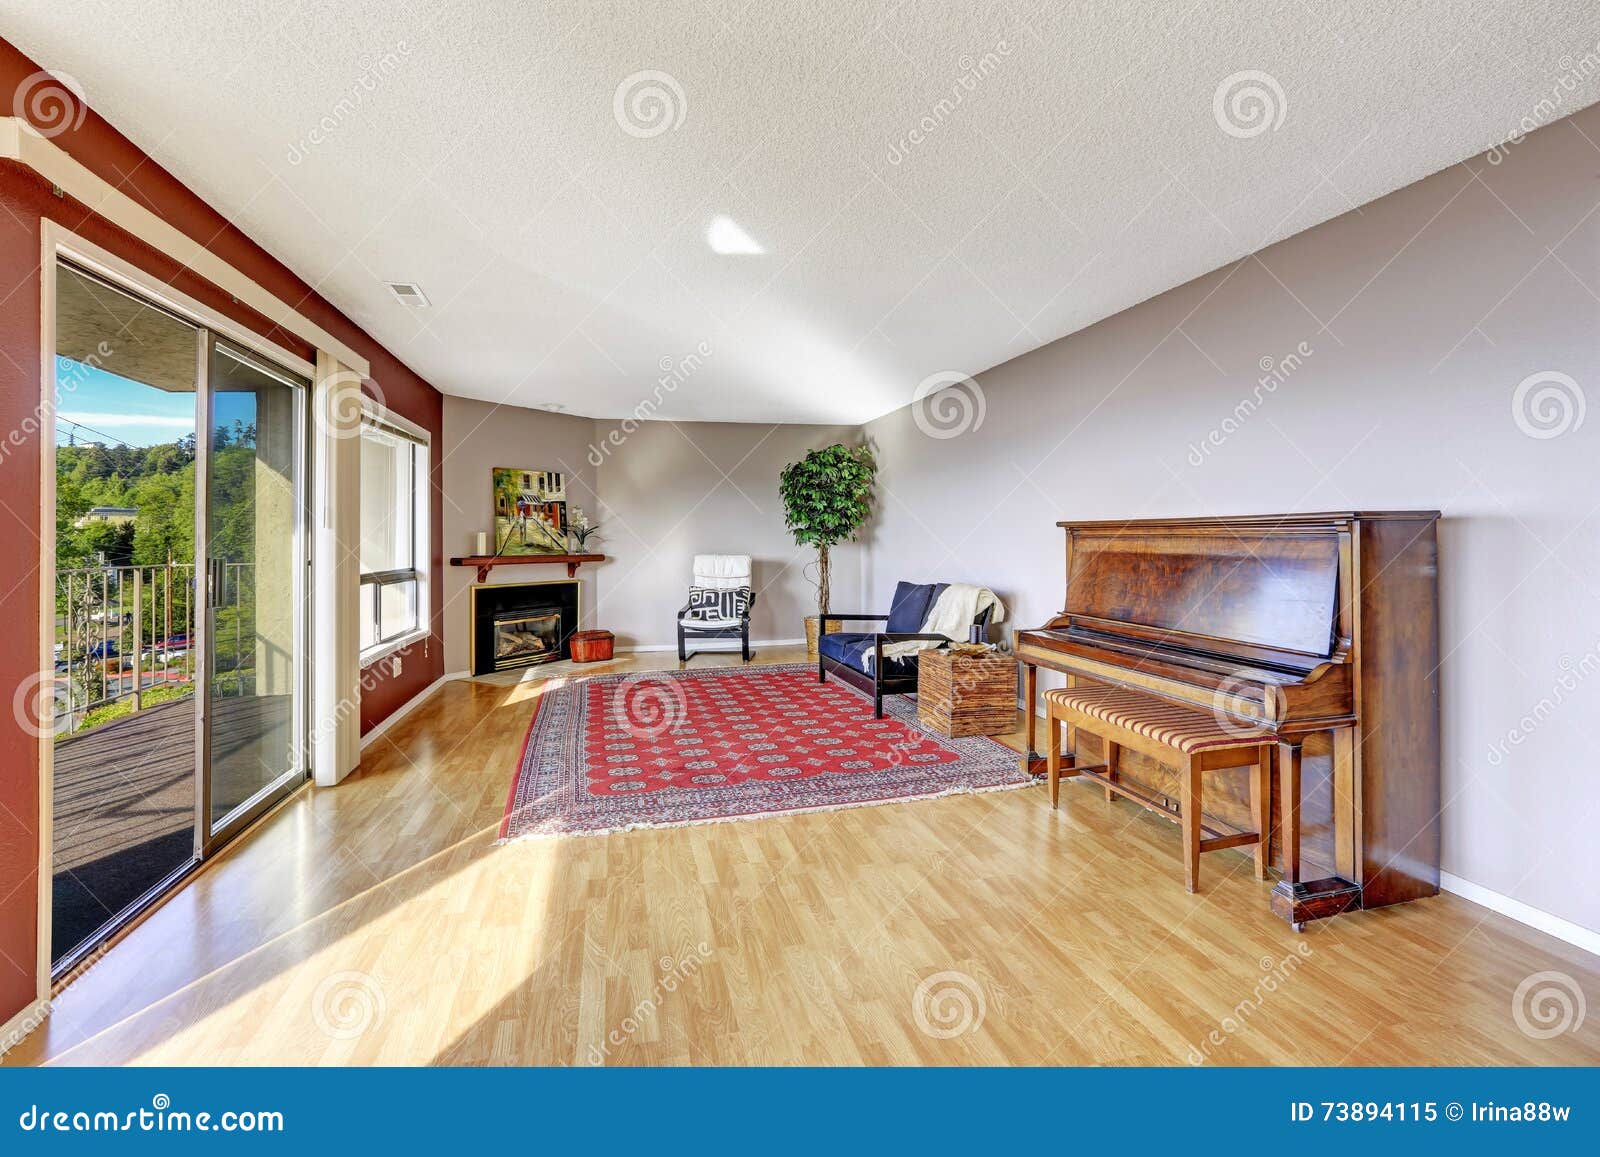 Living Room With Hardwood Floor Fireplace Piano And Rug Stock